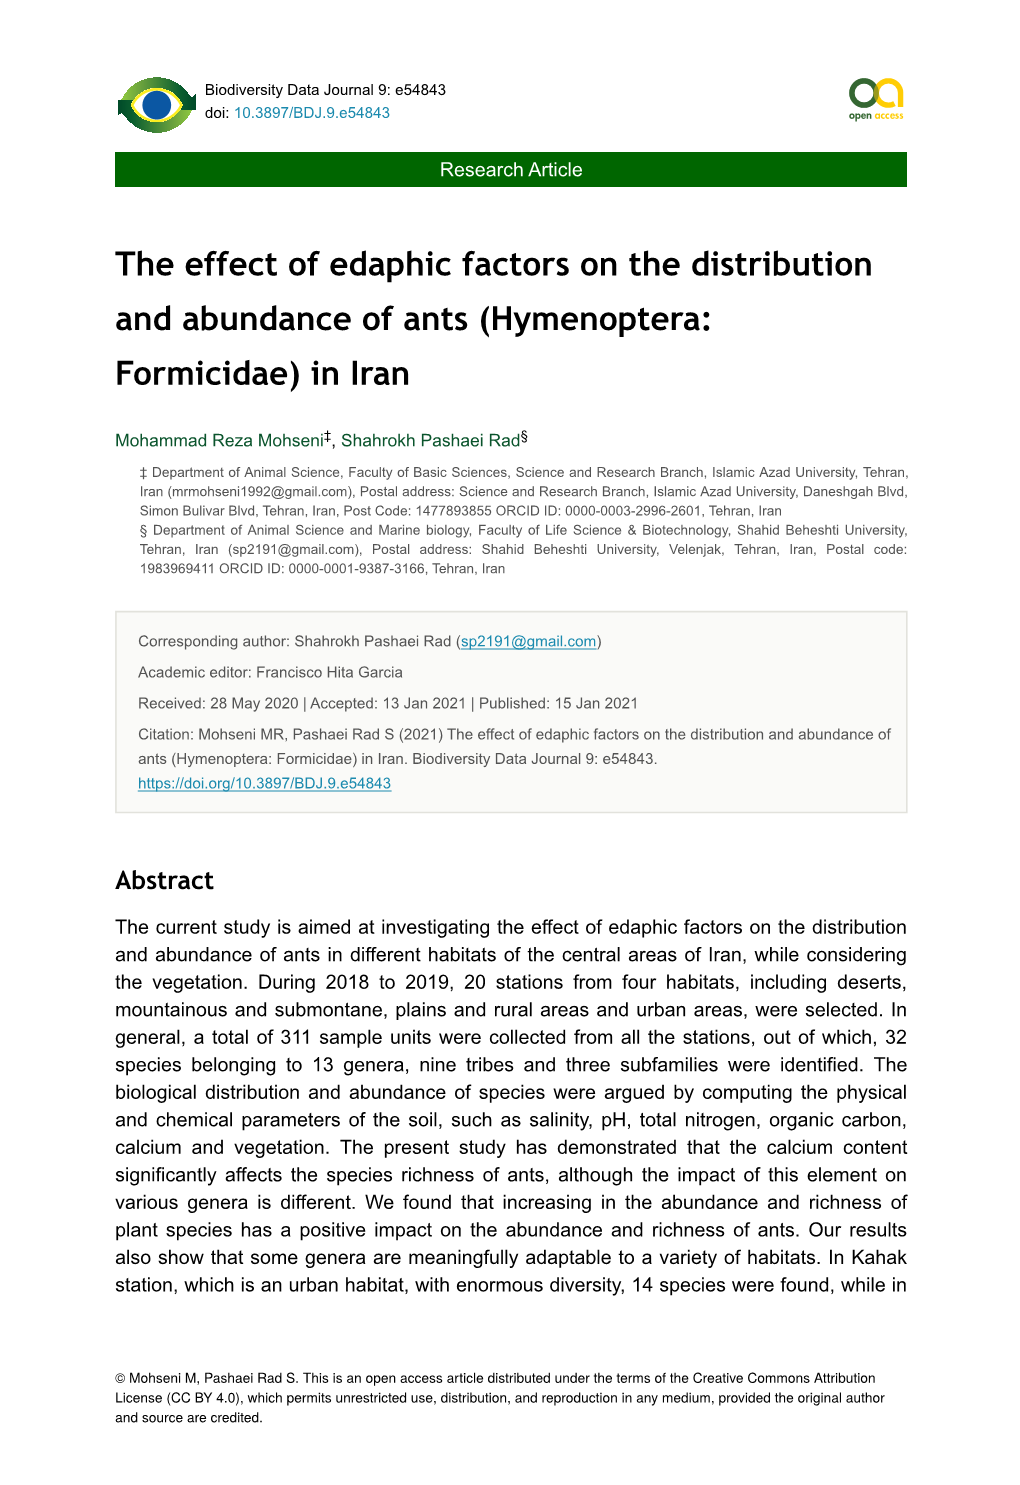 The Effect of Edaphic Factors on the Distribution and Abundance of Ants (Hymenoptera: Formicidae) in Iran